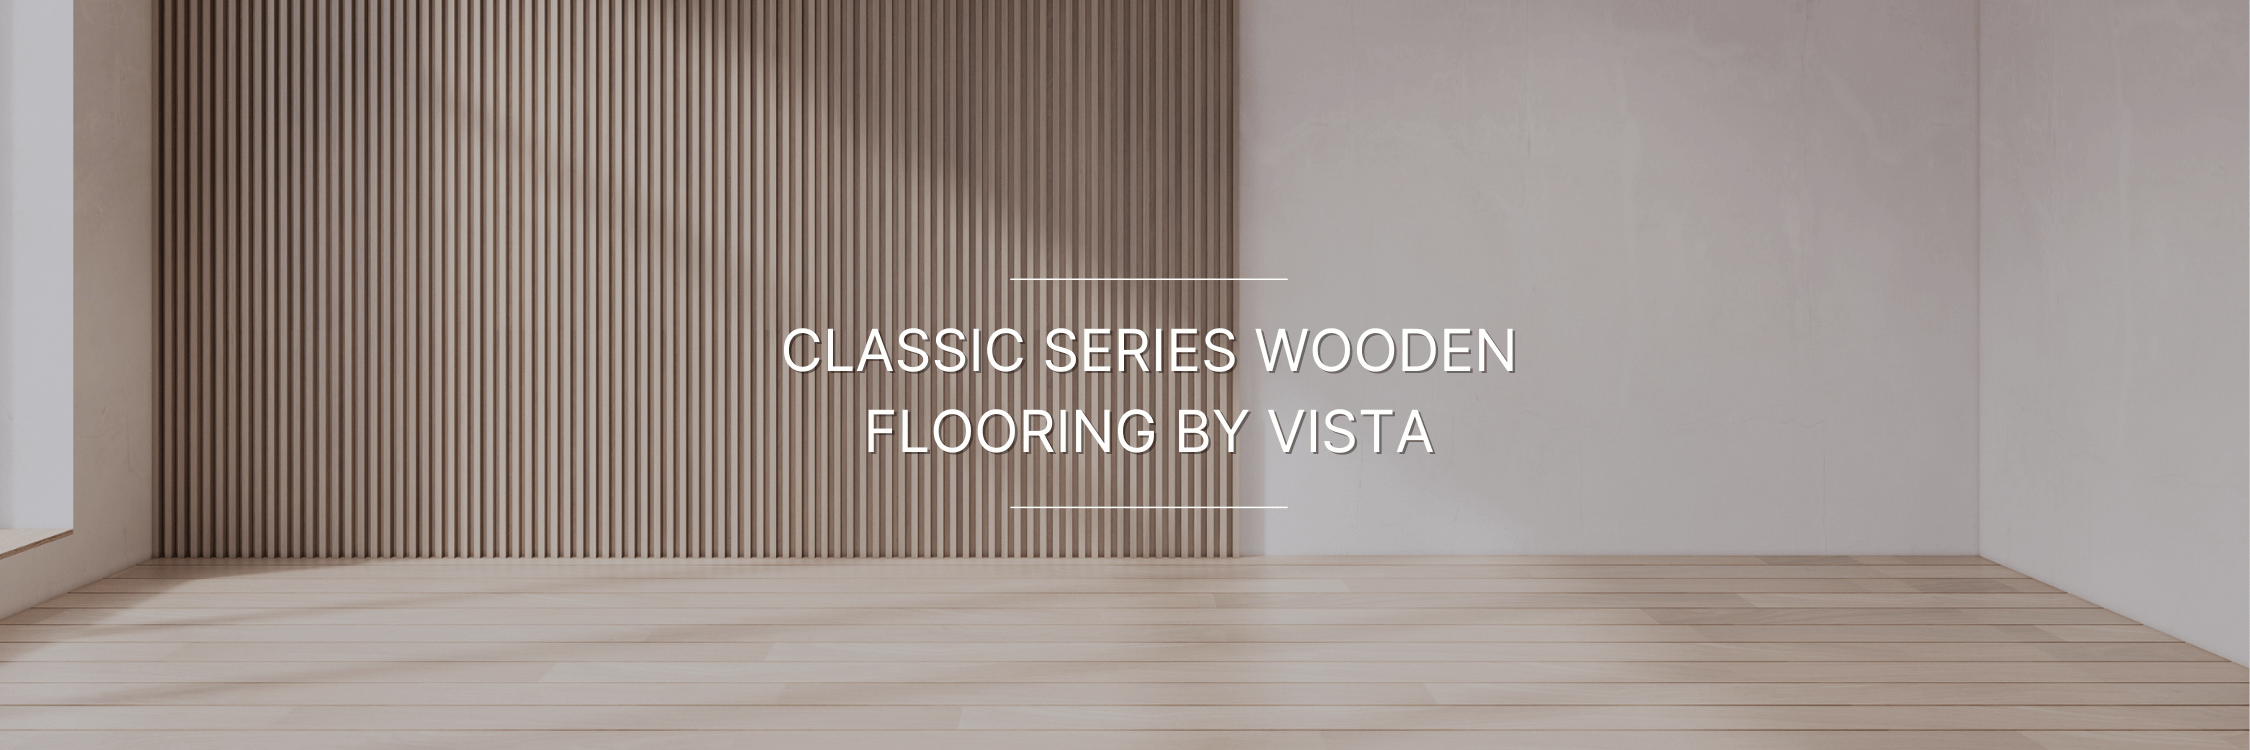 classic series wooden flooring by Vista